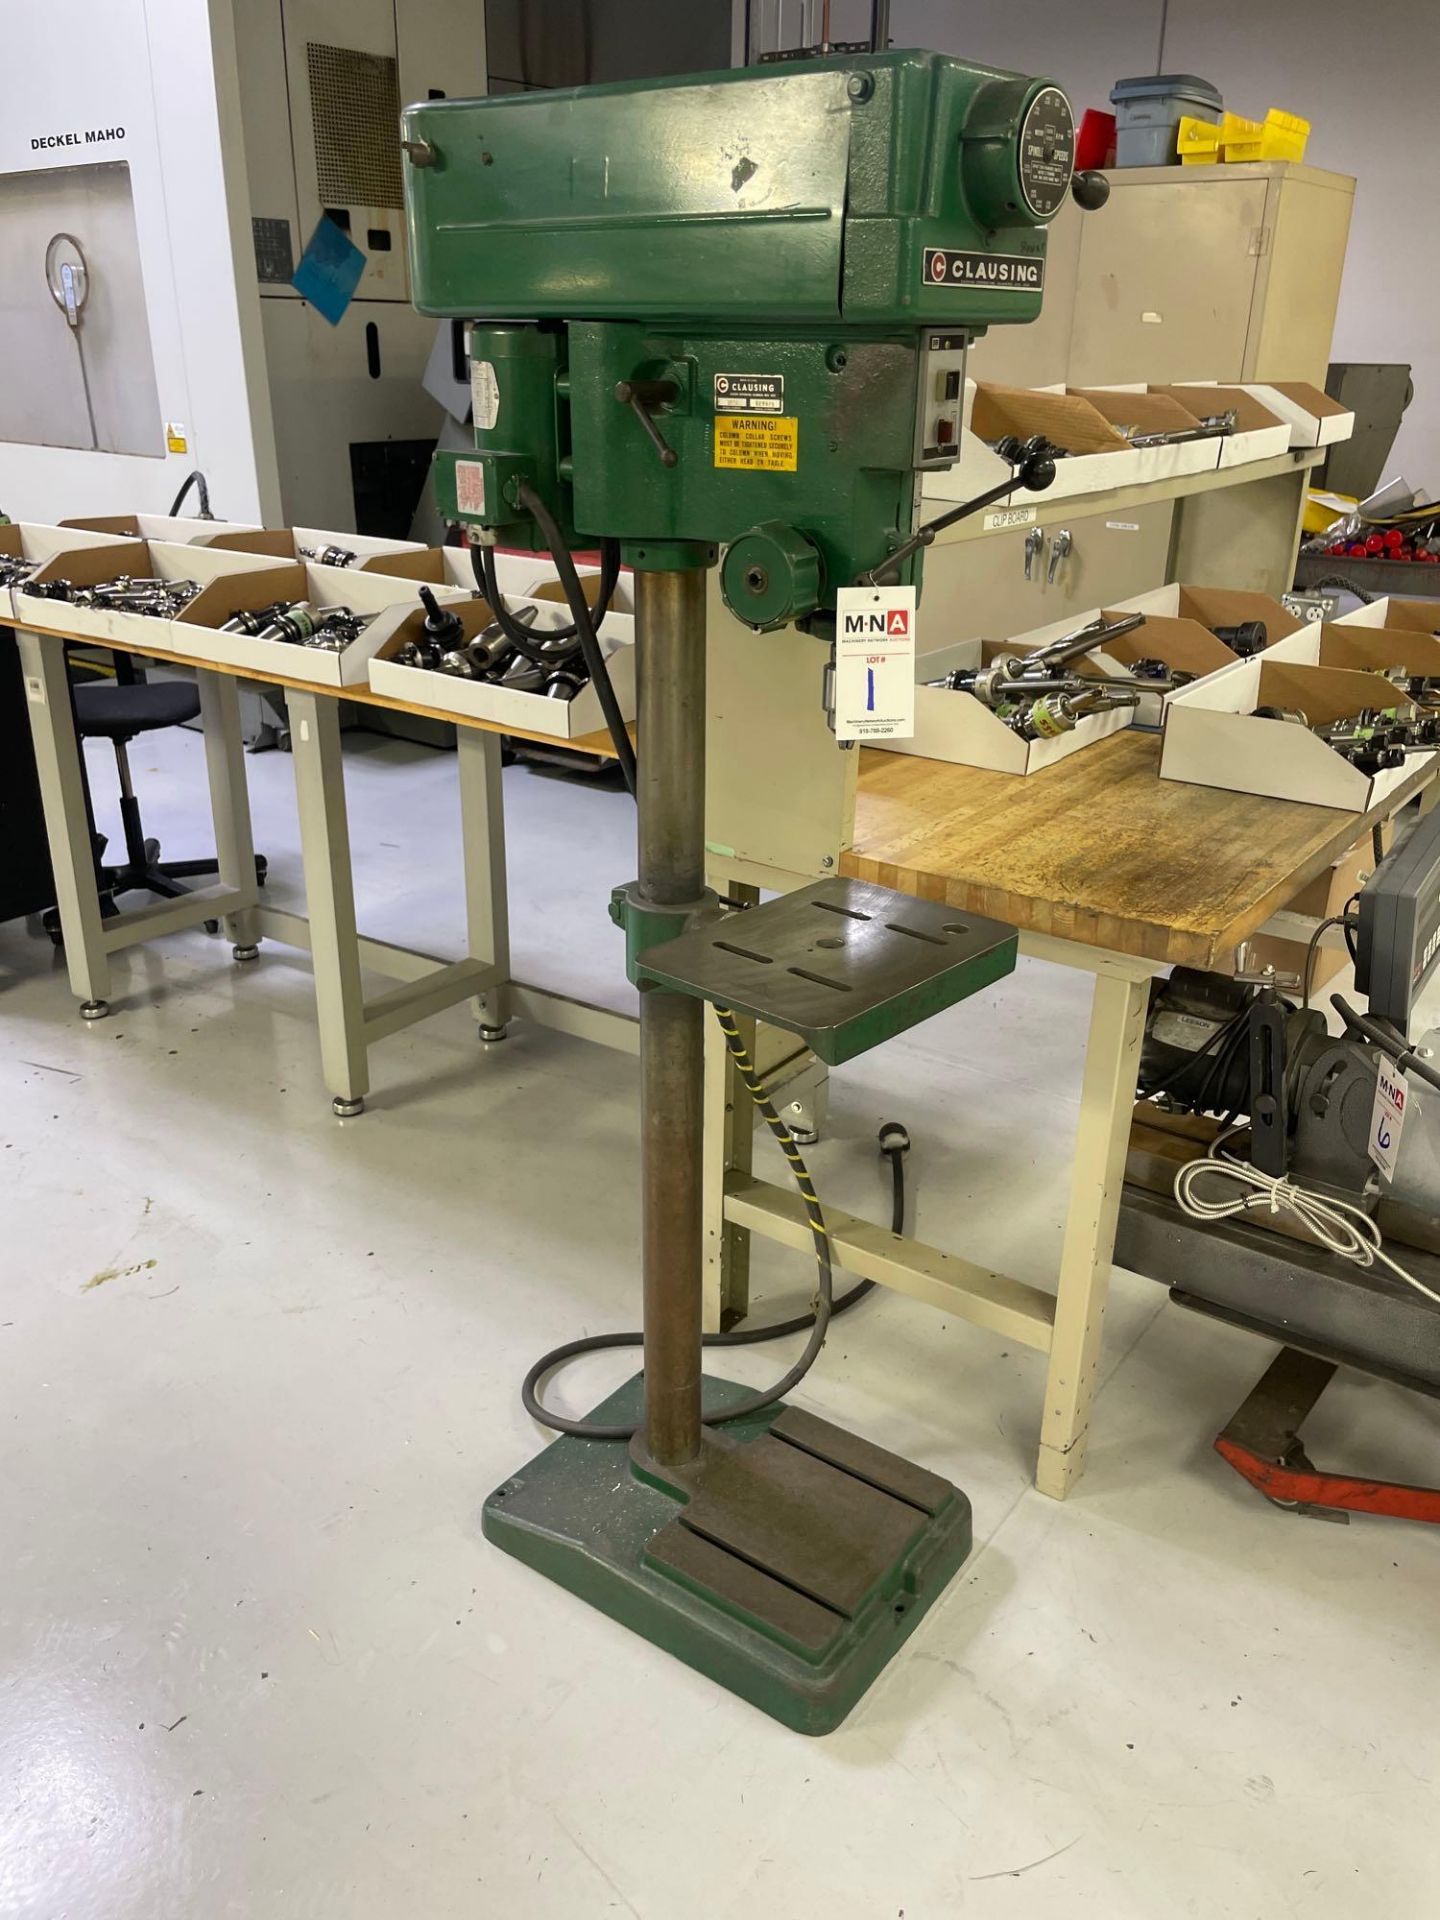 Clausing 1671 16" Floor Model Drill Press, s/n 629925 - Image 2 of 5